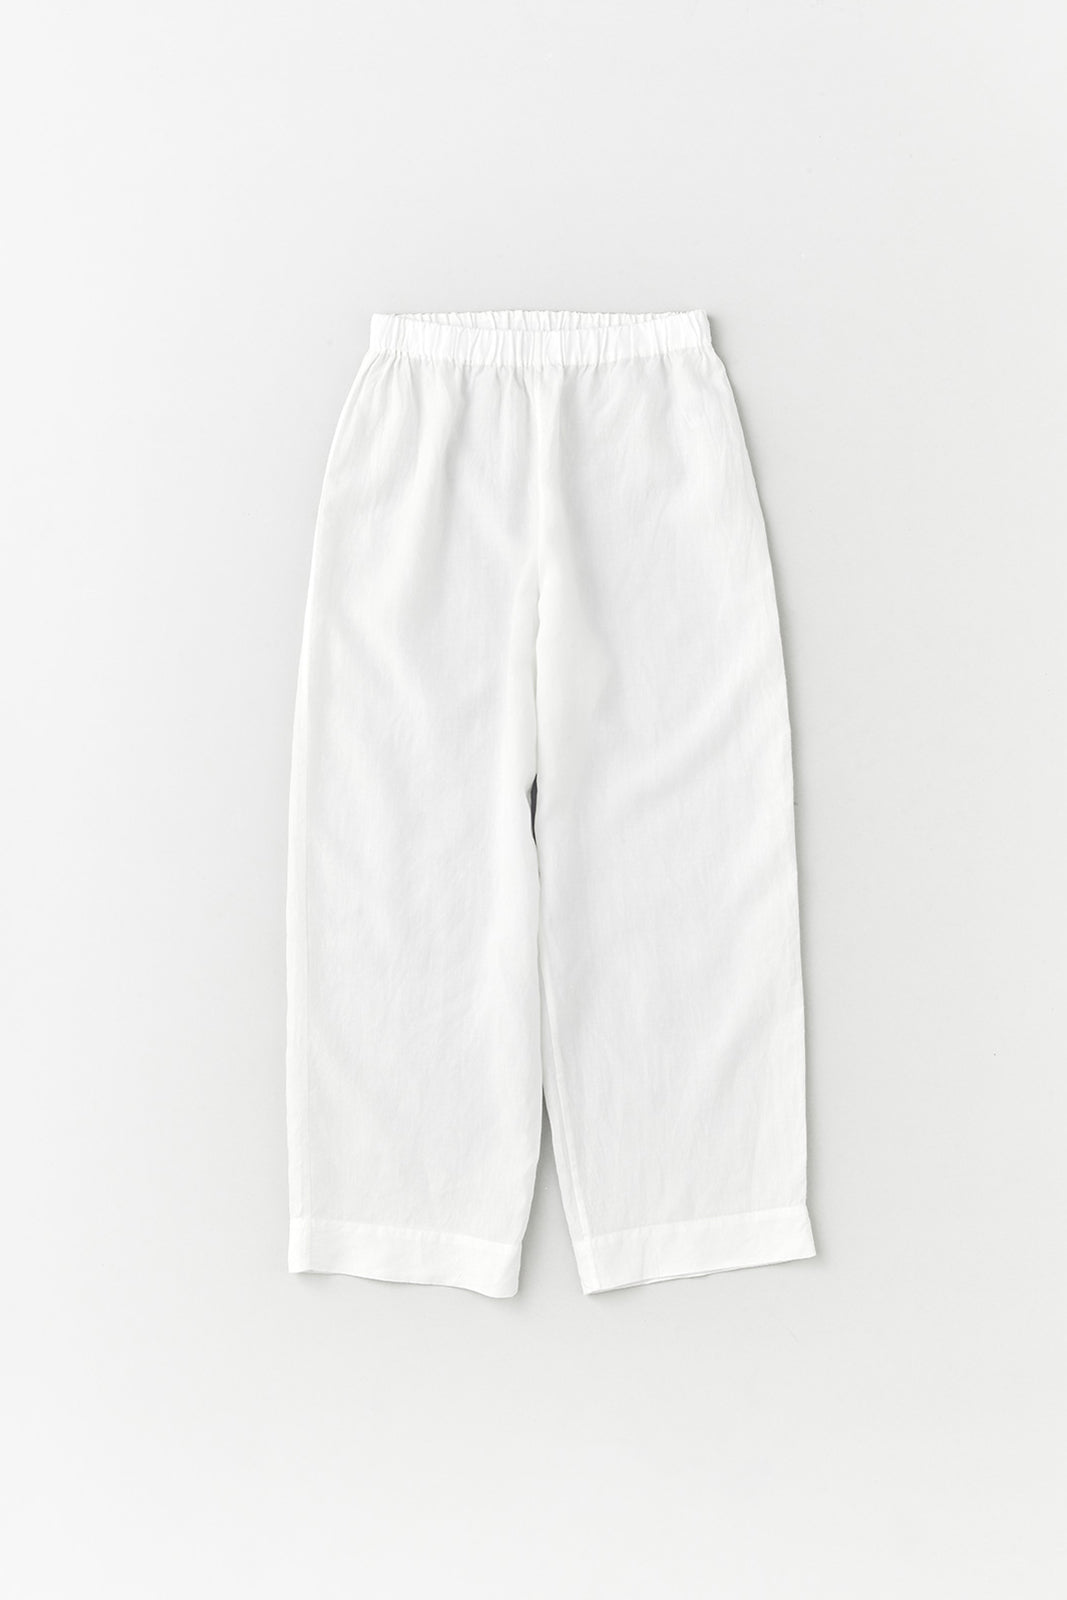 Arts-and-Science-Simple-Pajama-pants-white-amarees